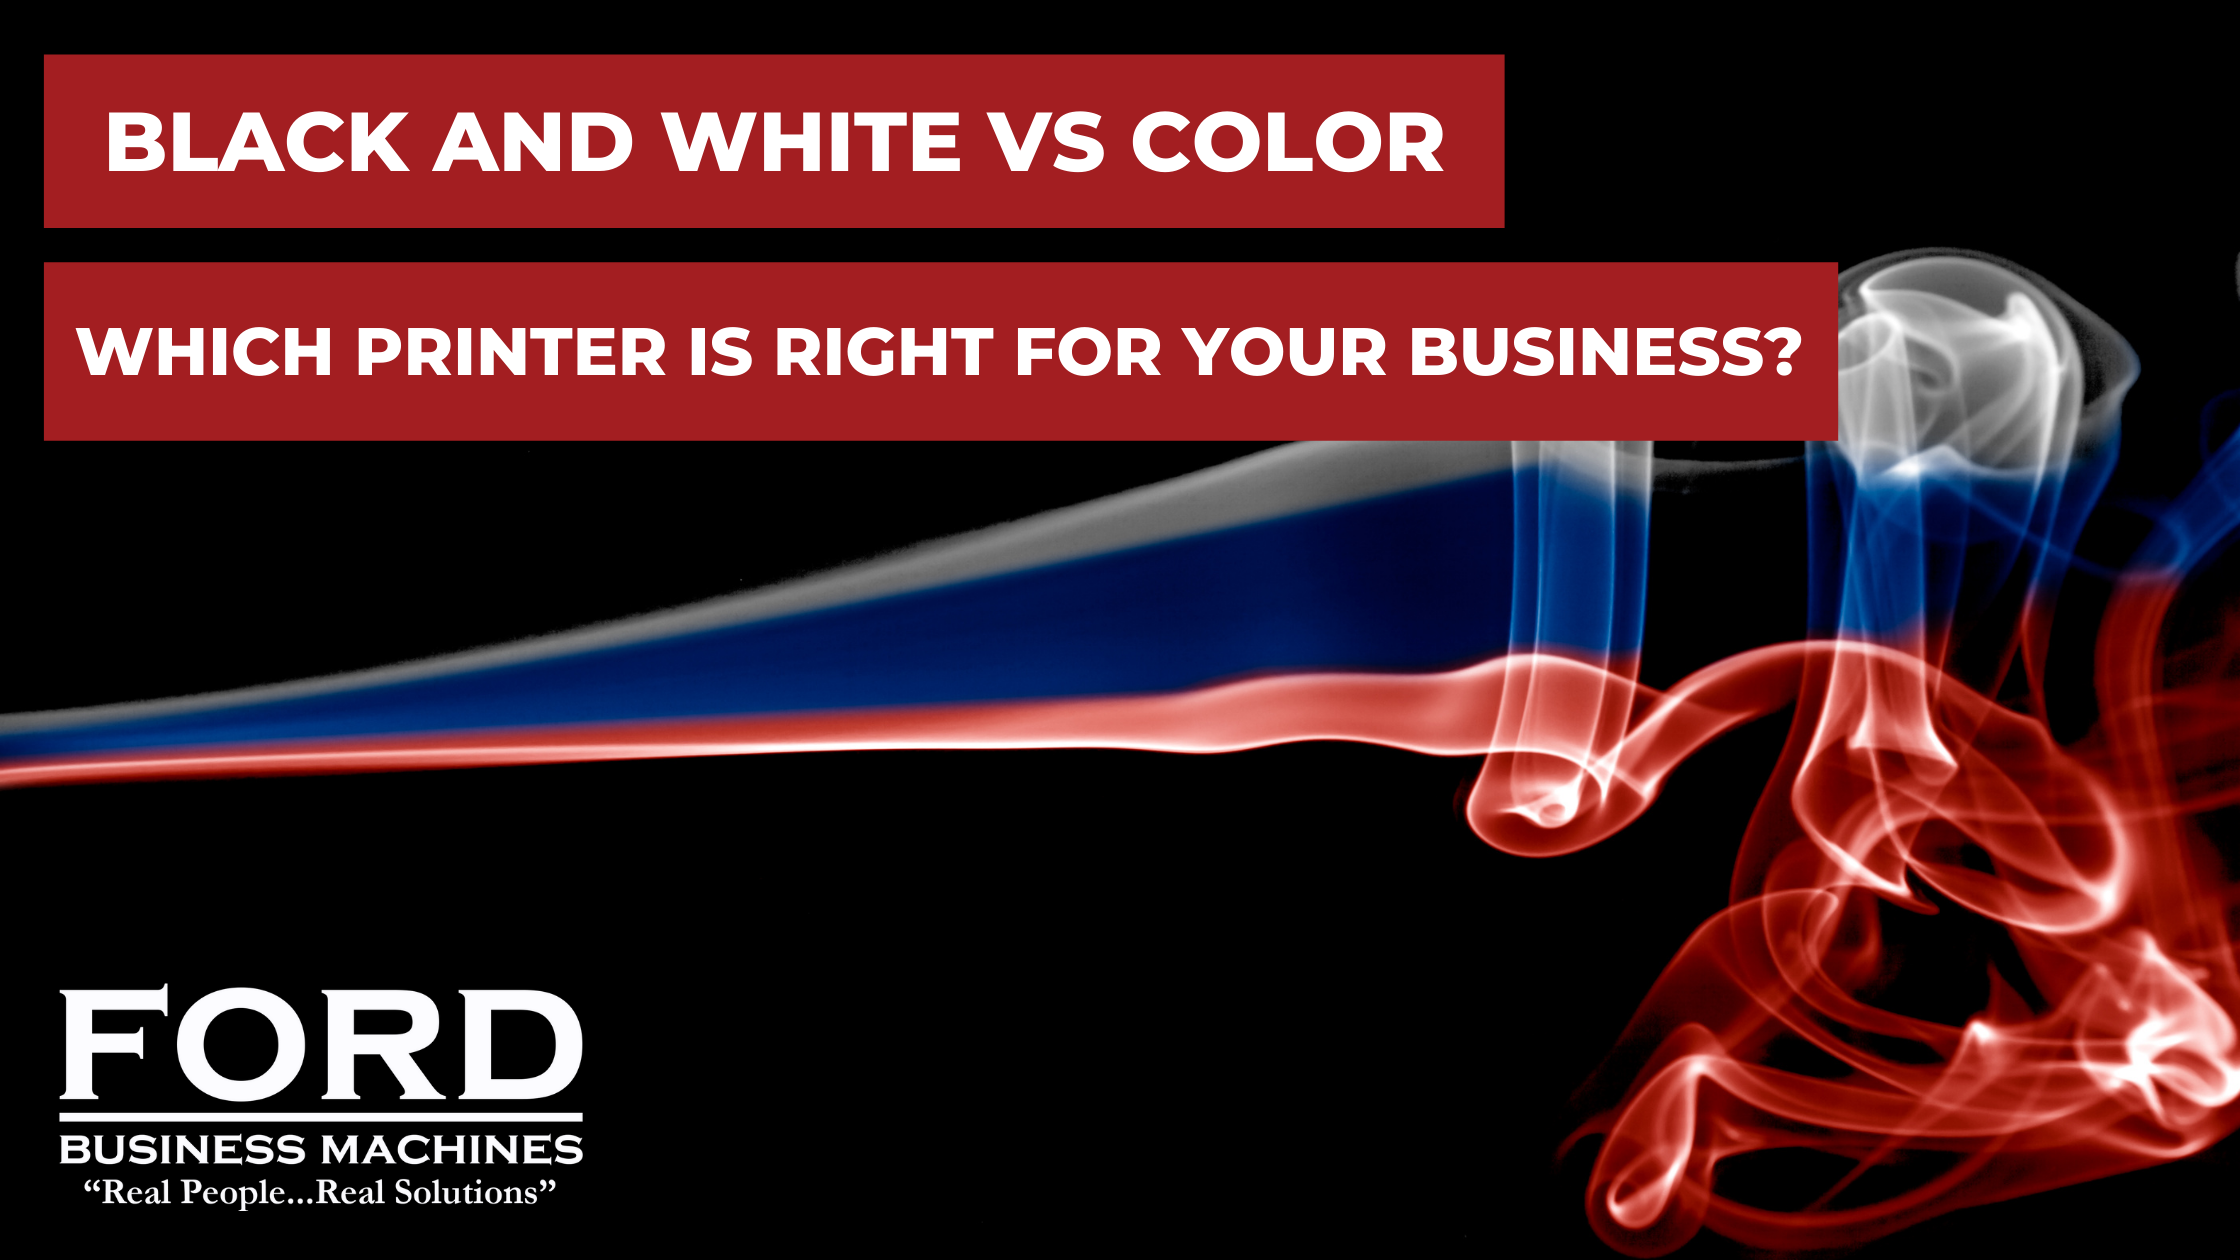 Black and White vs Color Printer - Find Out Which is Best for Your Business